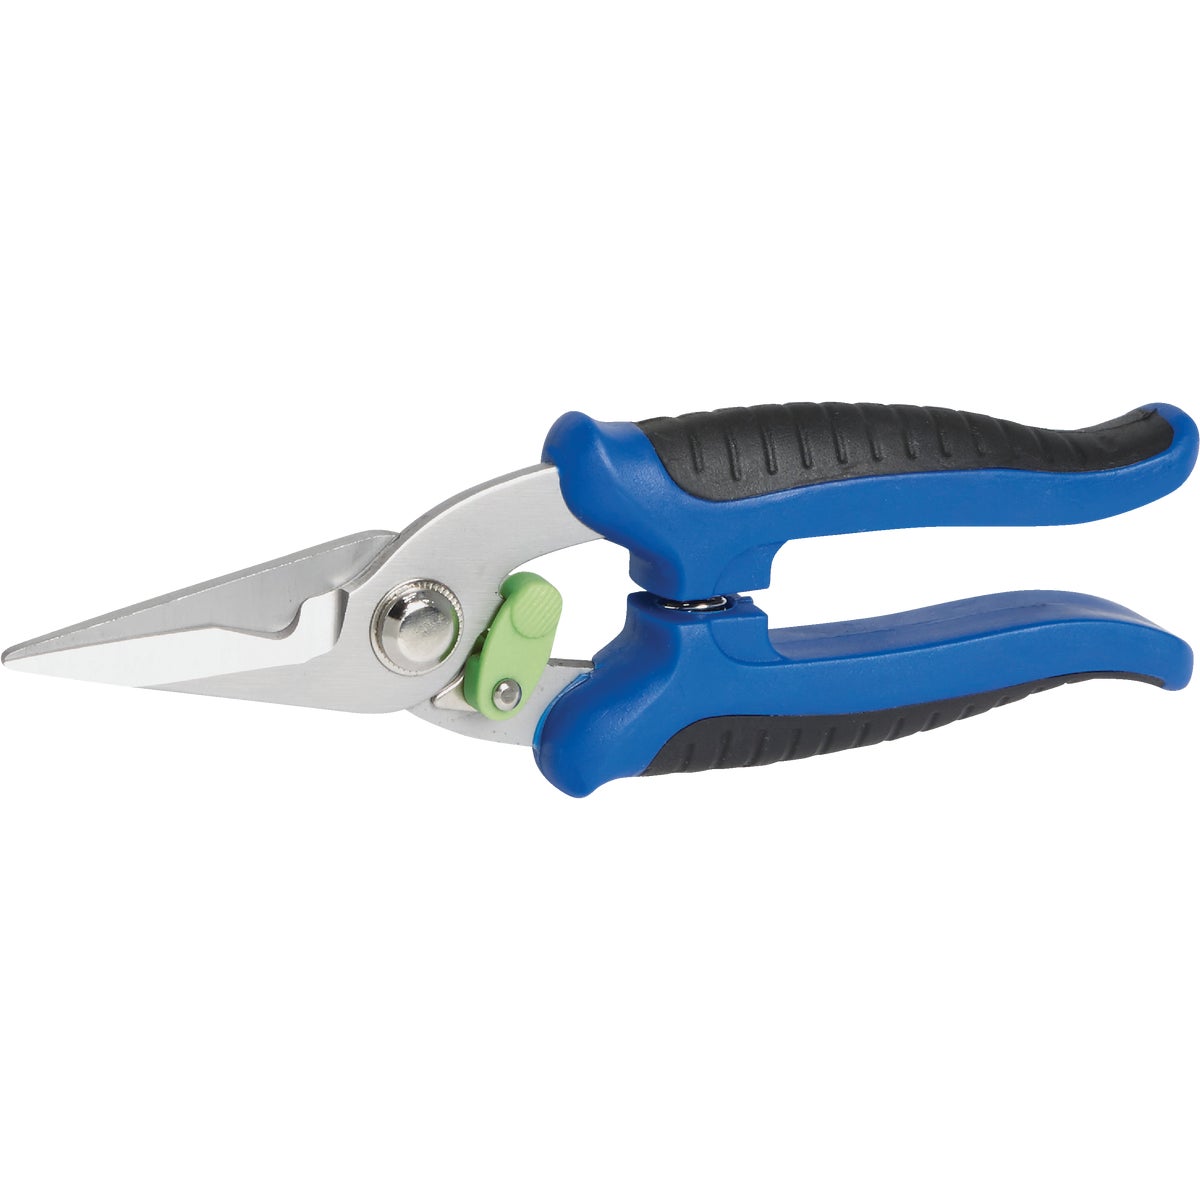 Item 702586, Stainless steel straight blade with 1/2 In. cutting capacity.